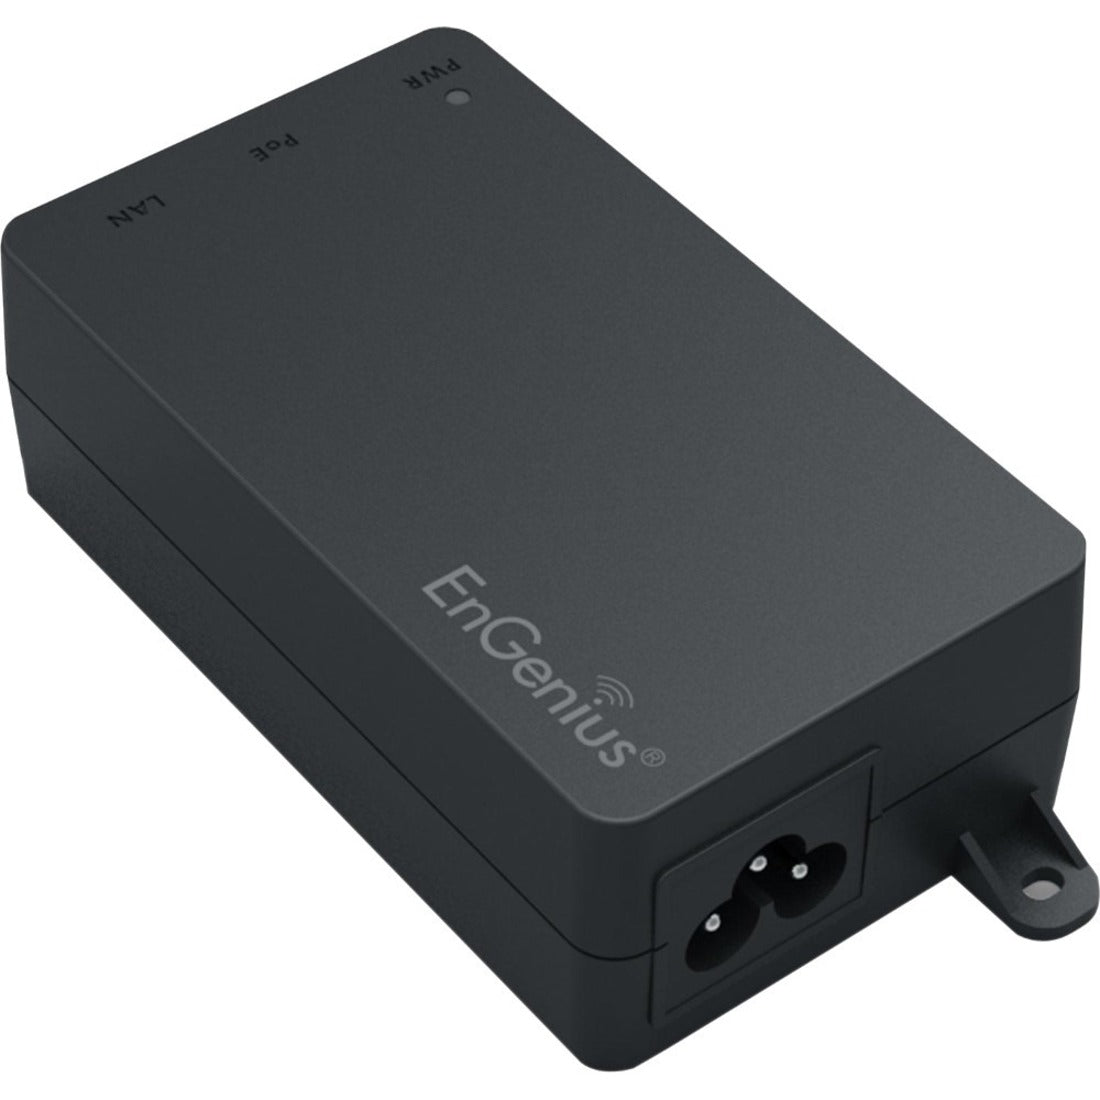 EnGenius EPA2406GR Gigabit Proprietary PoE Adapter with Reset Button, High-Speed Power Over Ethernet Solution